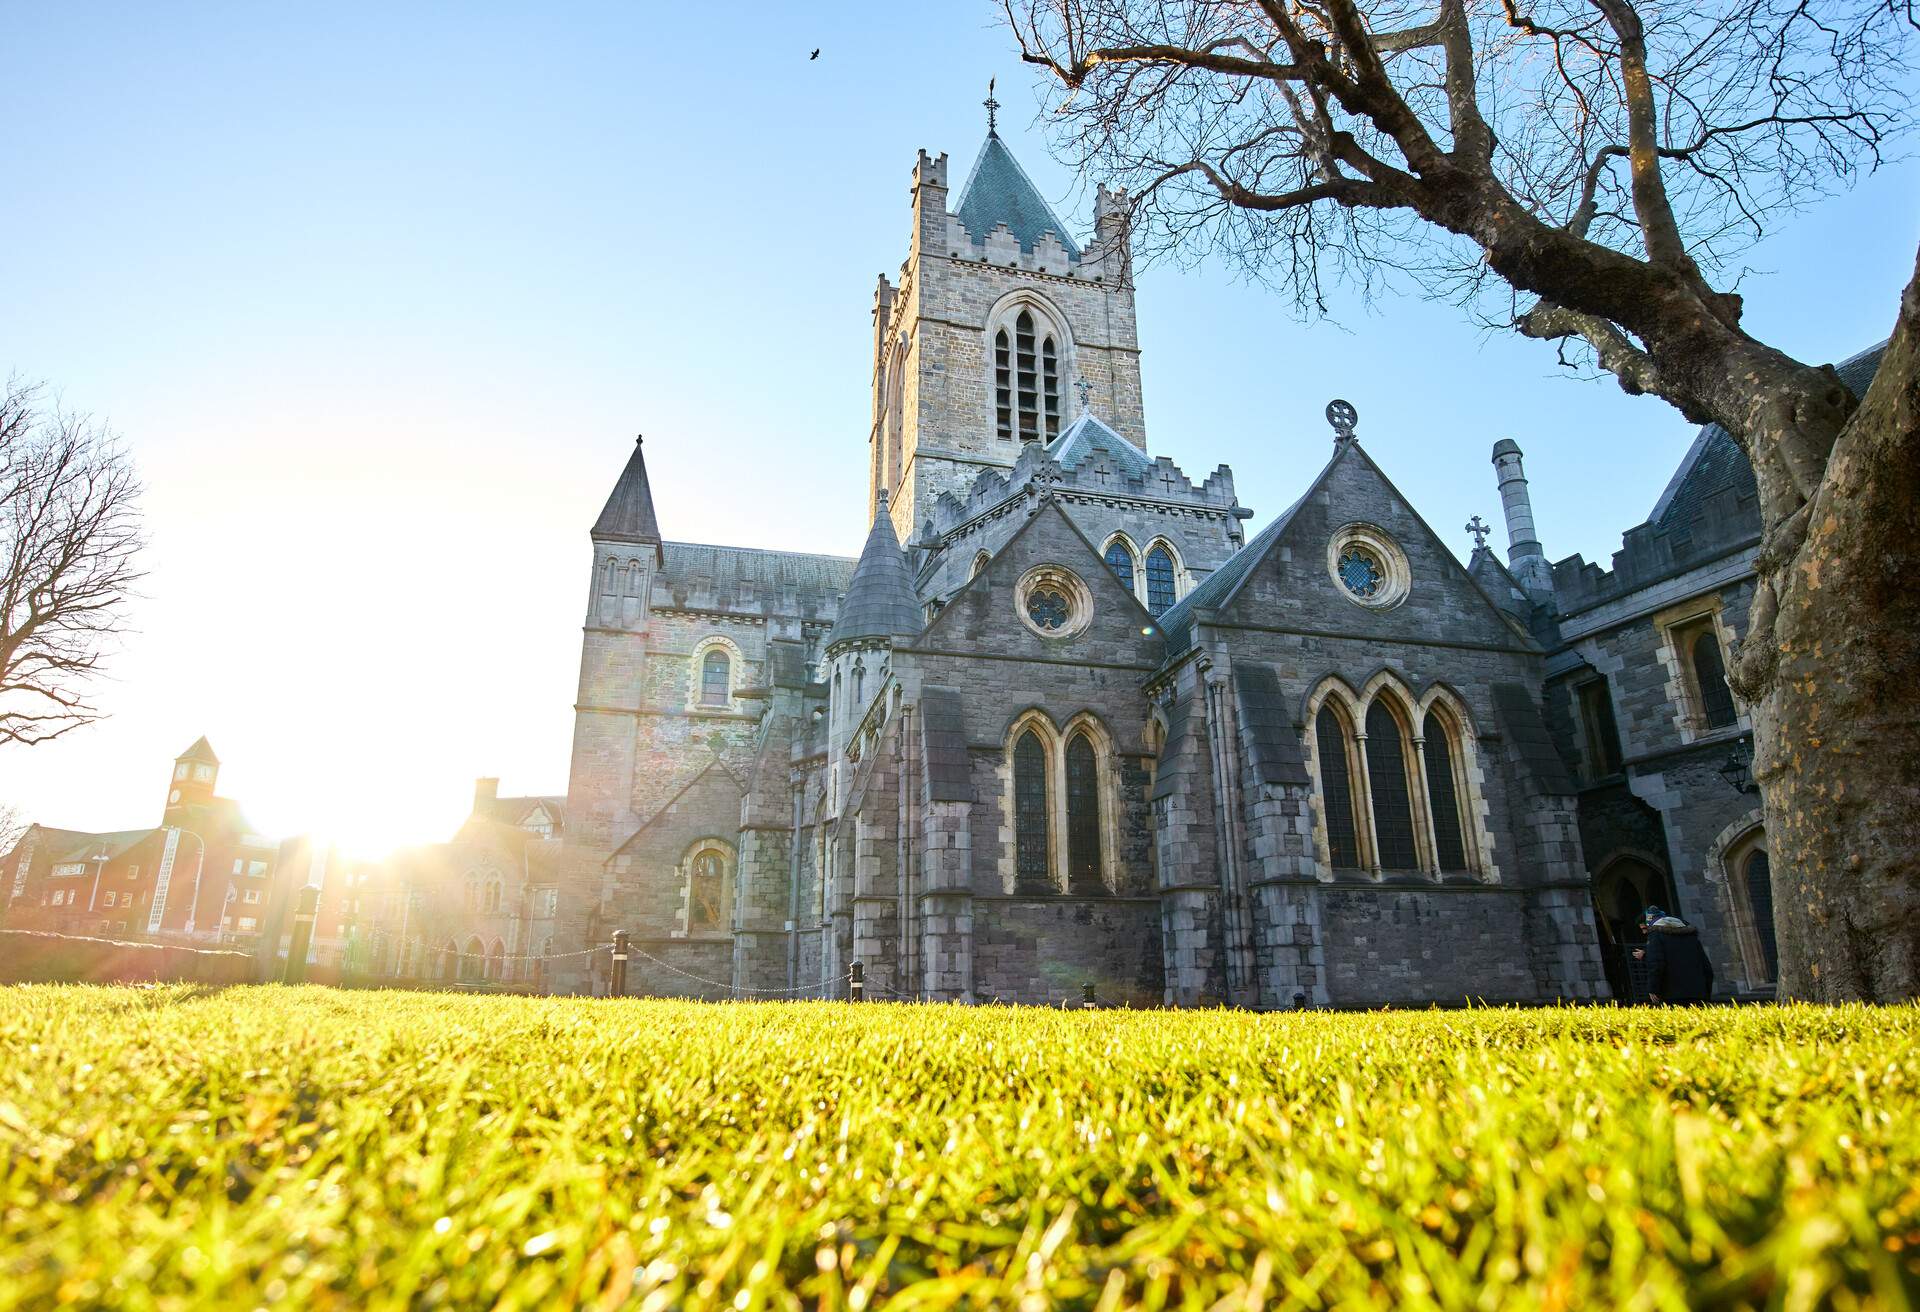 The sun shining peaking through the roofs behind The Christ Church Cathedral in Dublin on an early spring day 